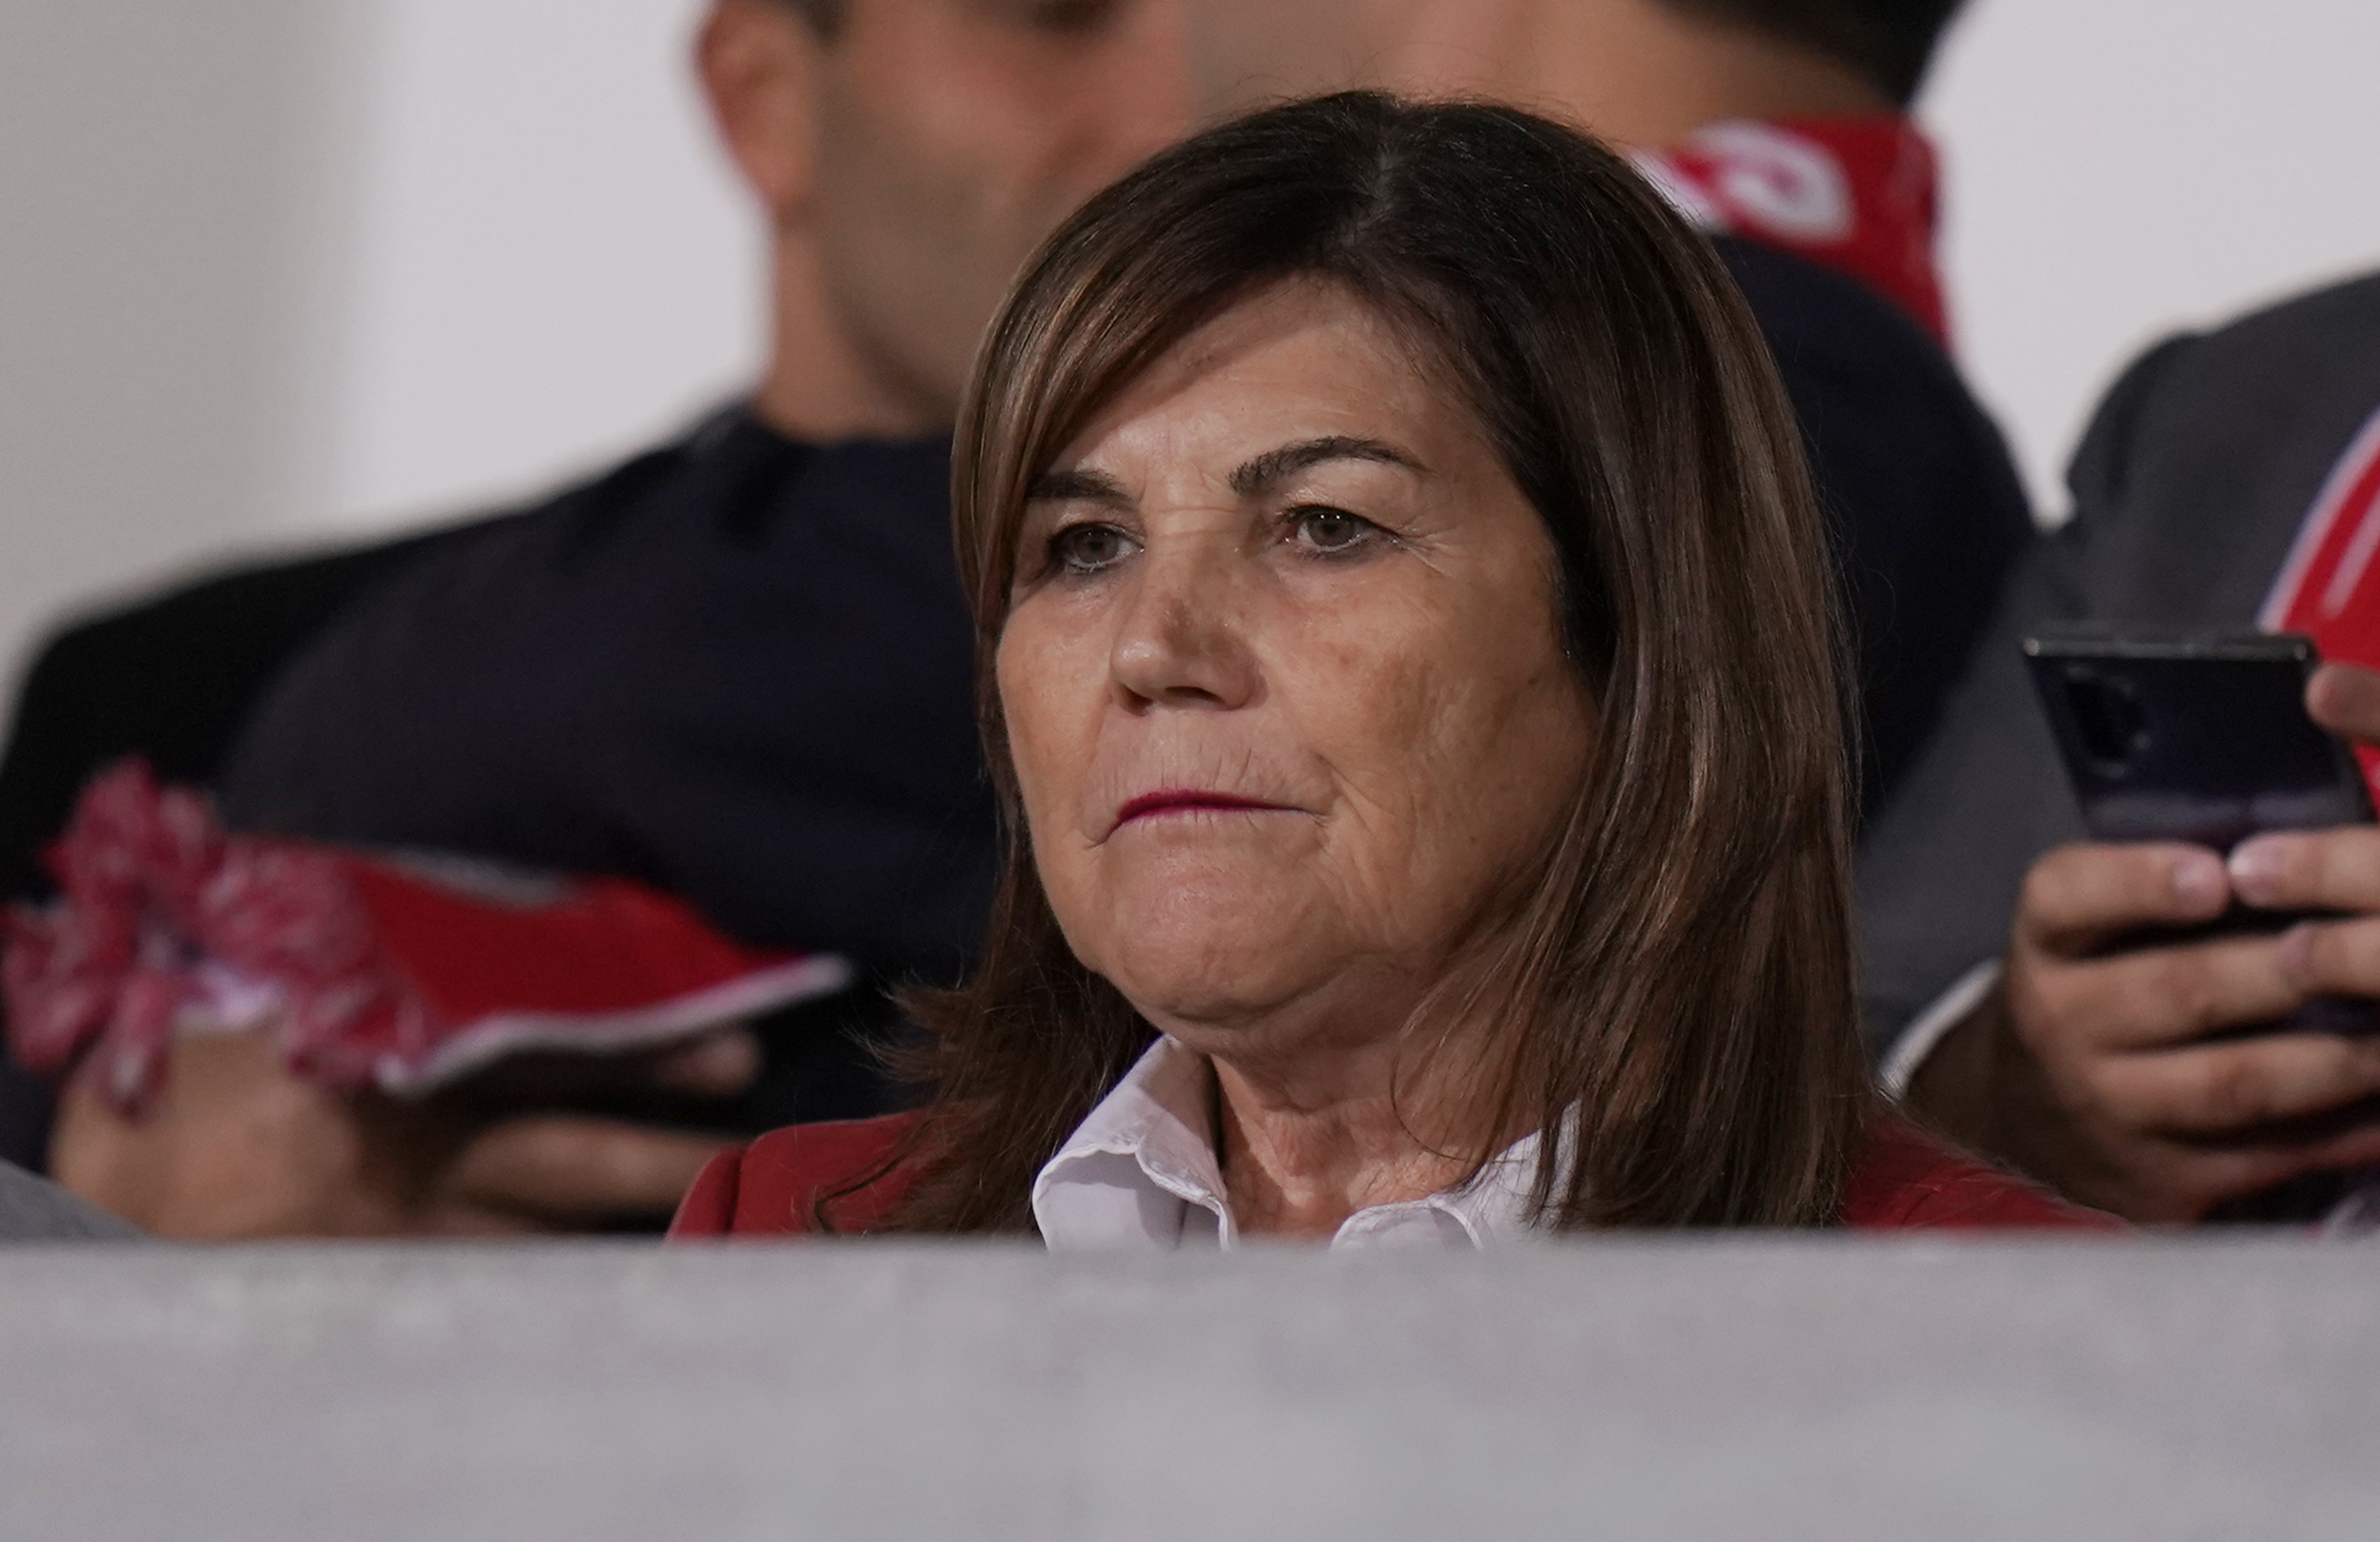 Dolores Aveiro at a Portuguese Cup match in Almada, Portugal on October 18, 2019 | Source: Getty Images